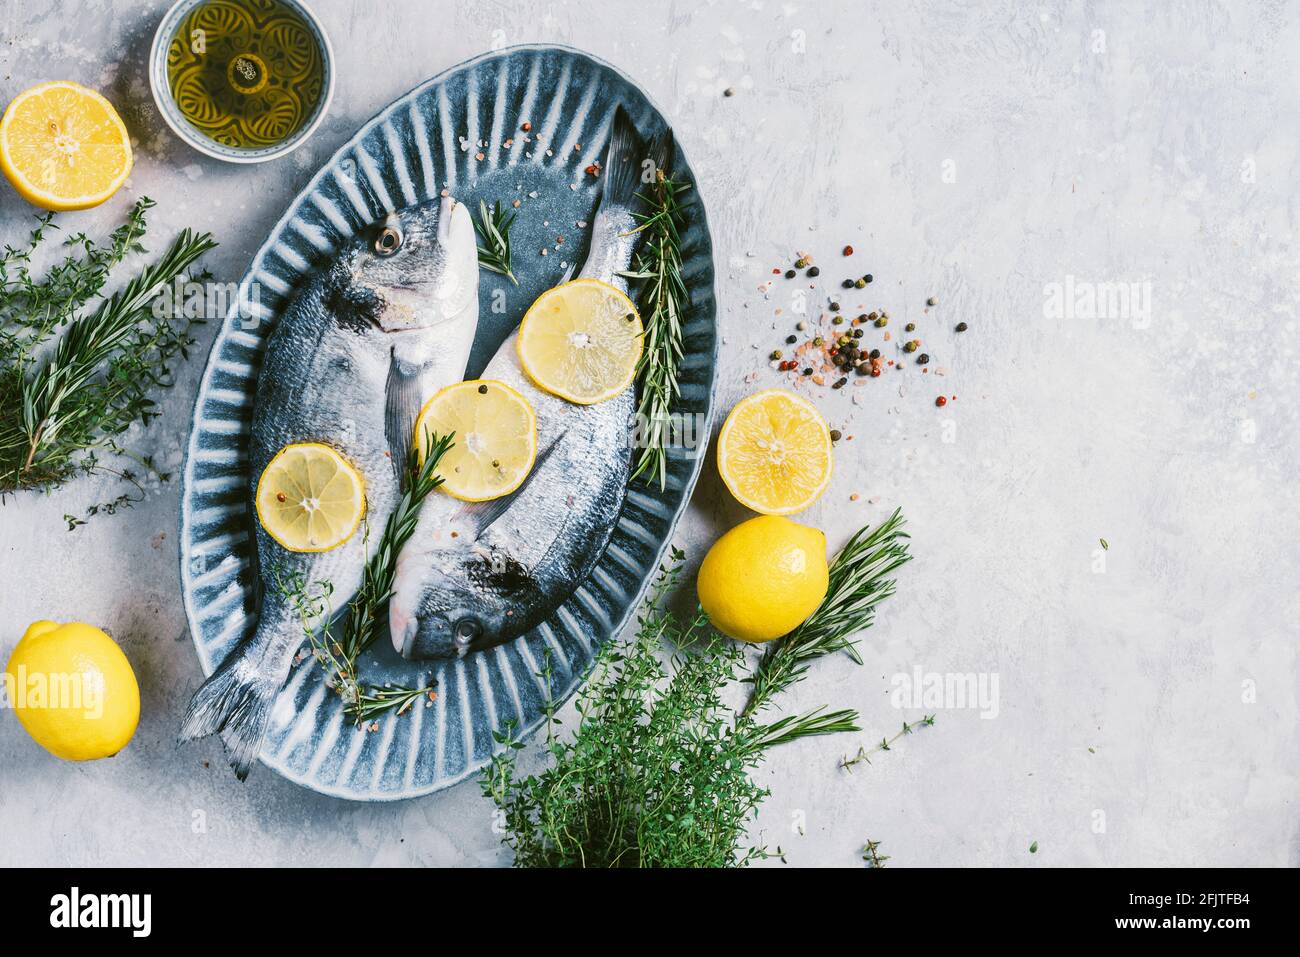 Fresh uncooked dorado or sea bream fish with lemon, herbs, oil, vegetables and spices on concrete background. Top view. Healthy food concept. Copy Stock Photo